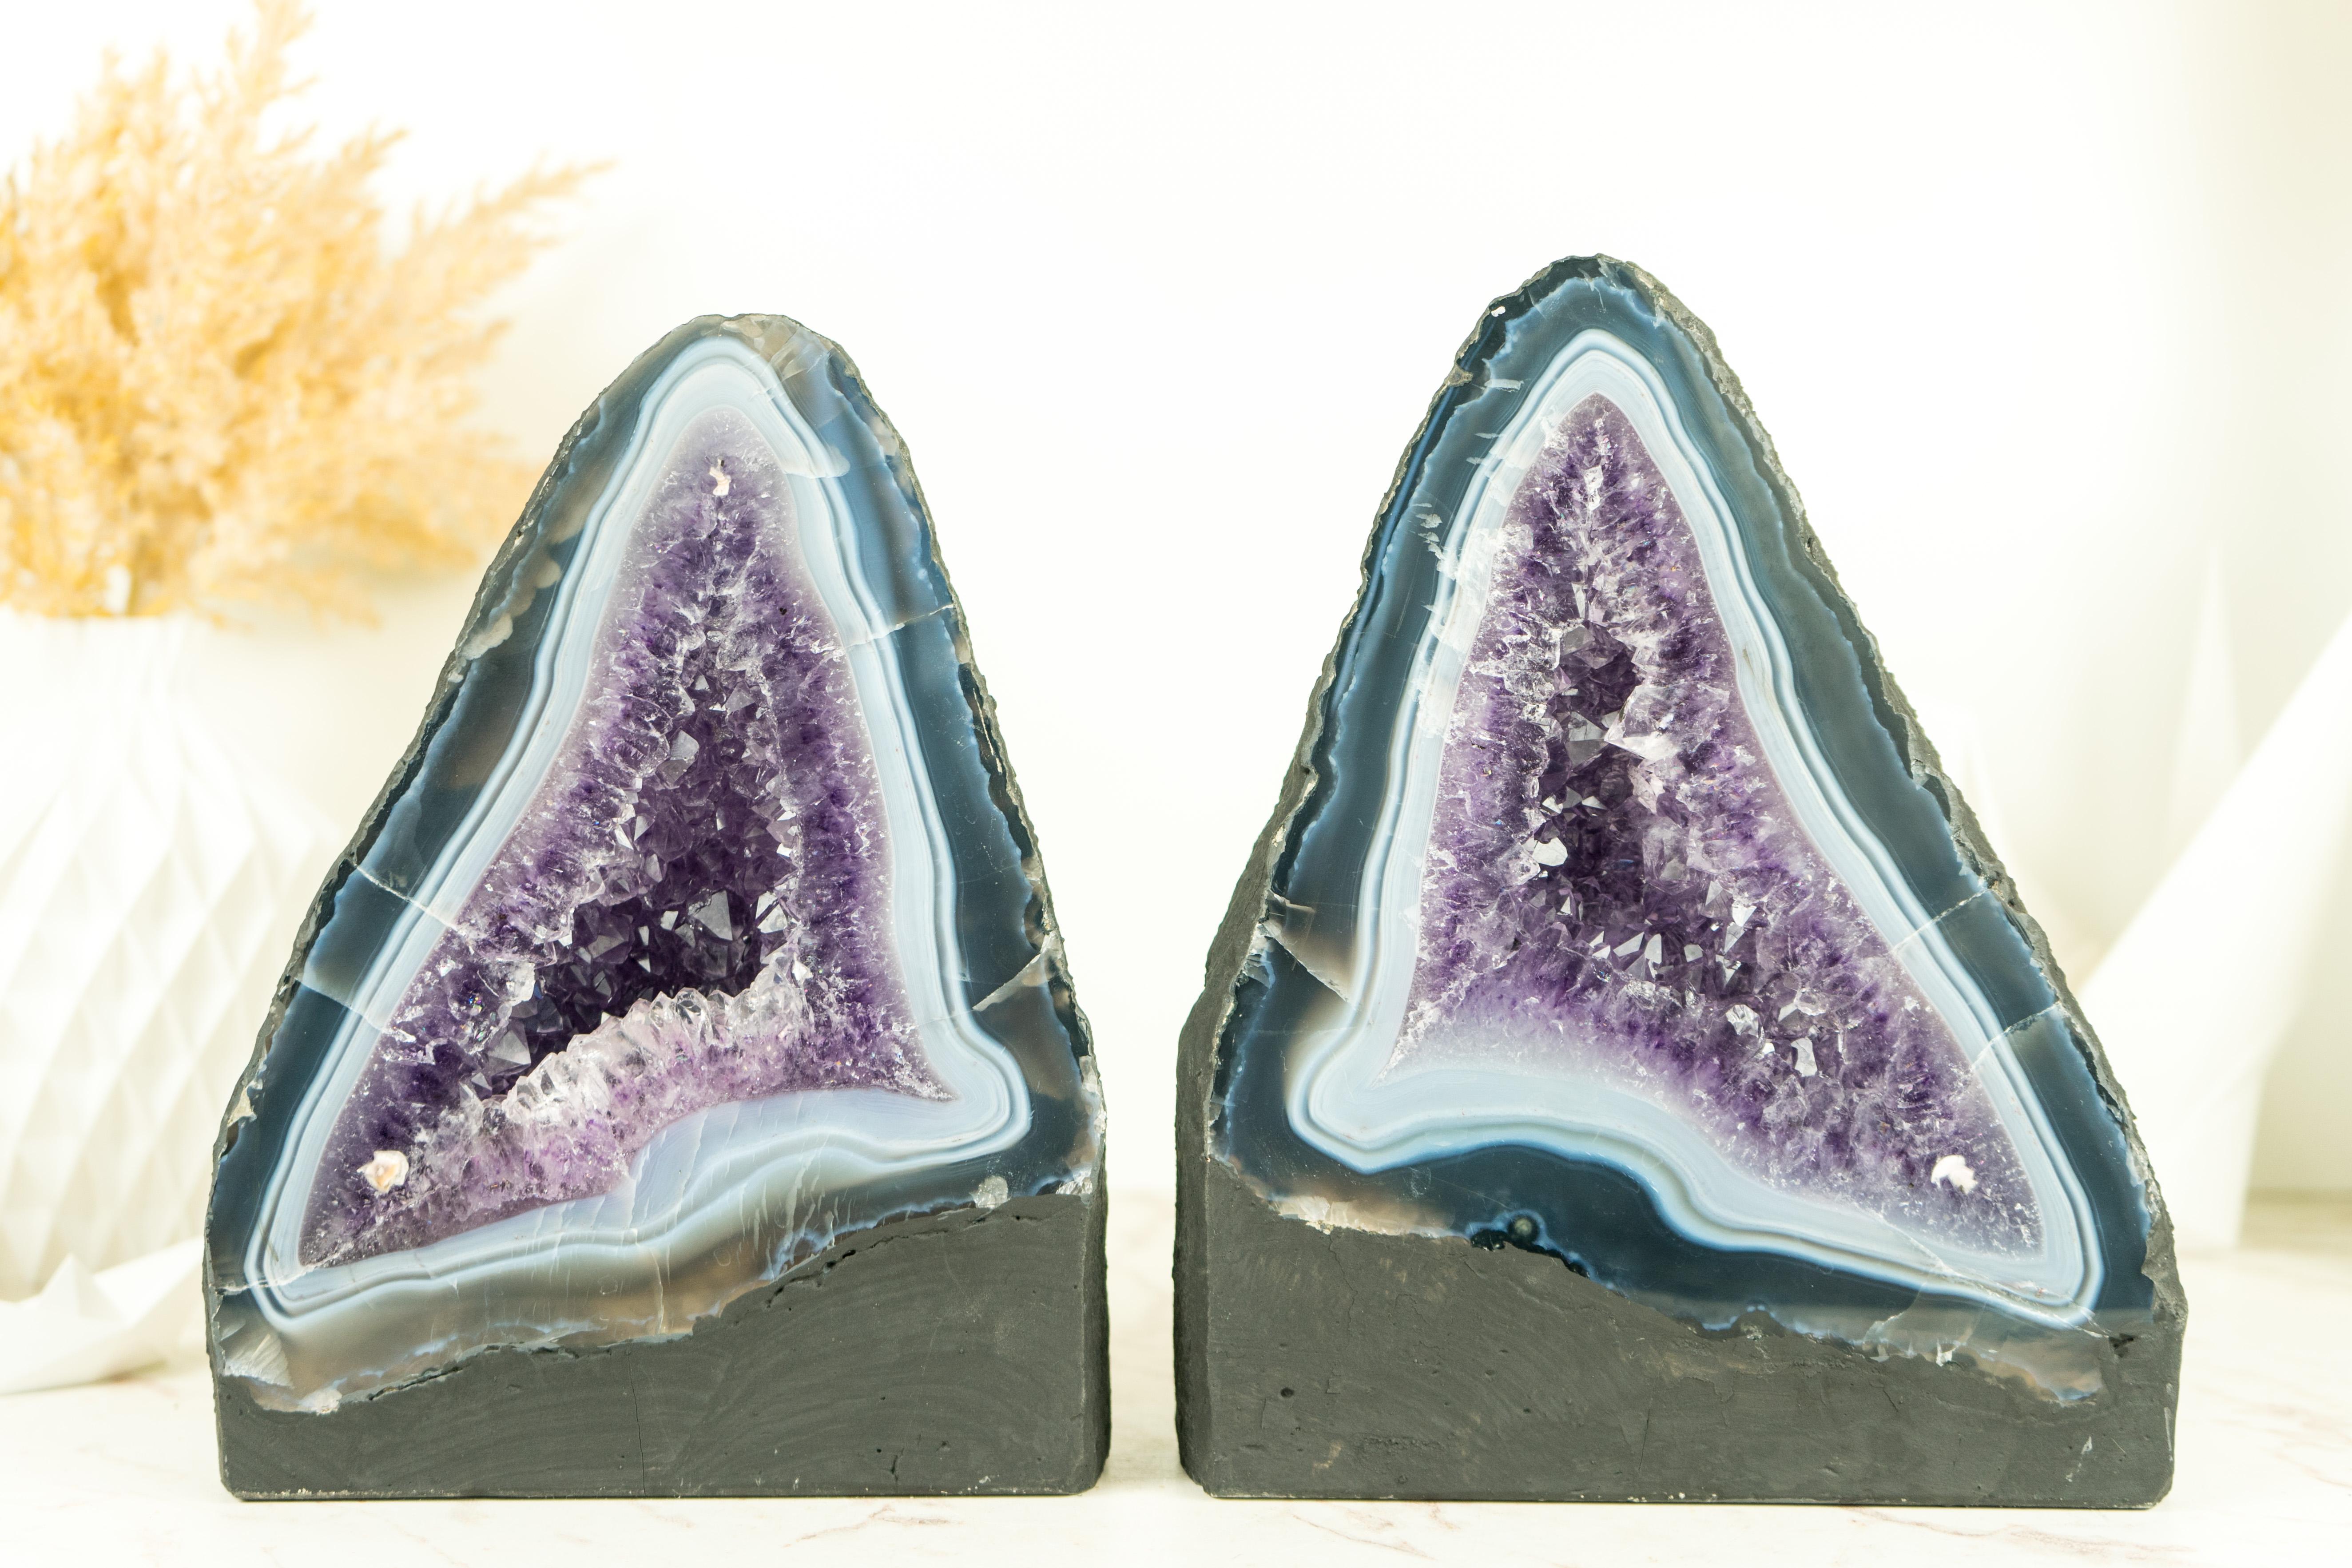 Exquisite, this pair of Blue and White Lace Agate Cathedrals showcases stunning agate lines, book-matching patterns, and beautifully formed geodes. A pair of Geodes make a wonderful addition to any collection, bookshelf, or table decor.

The